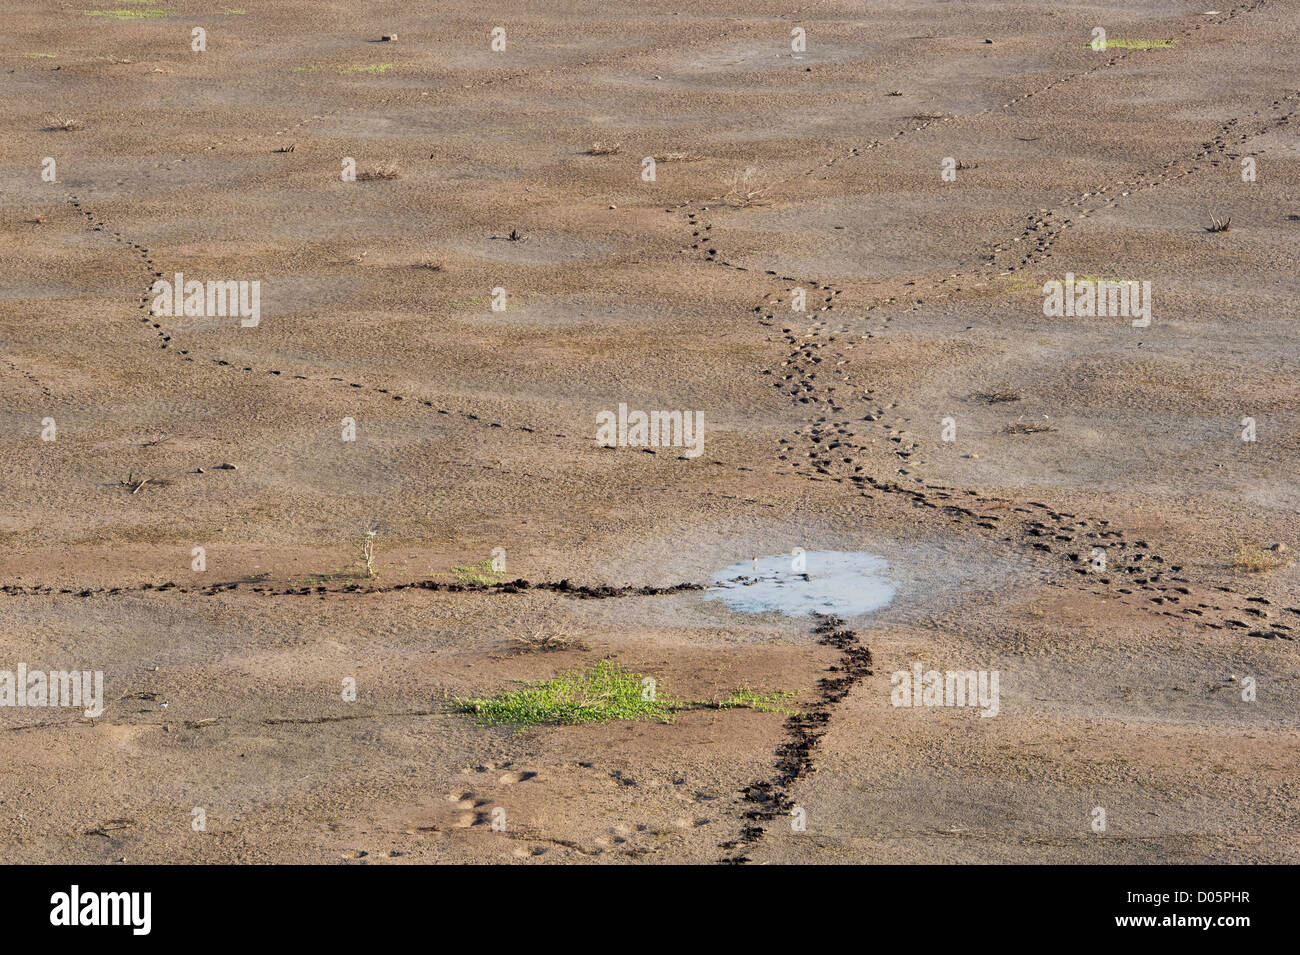 Animal tracks and footprints on a drying out indian lake. Andhra Pradesh, India Stock Photo